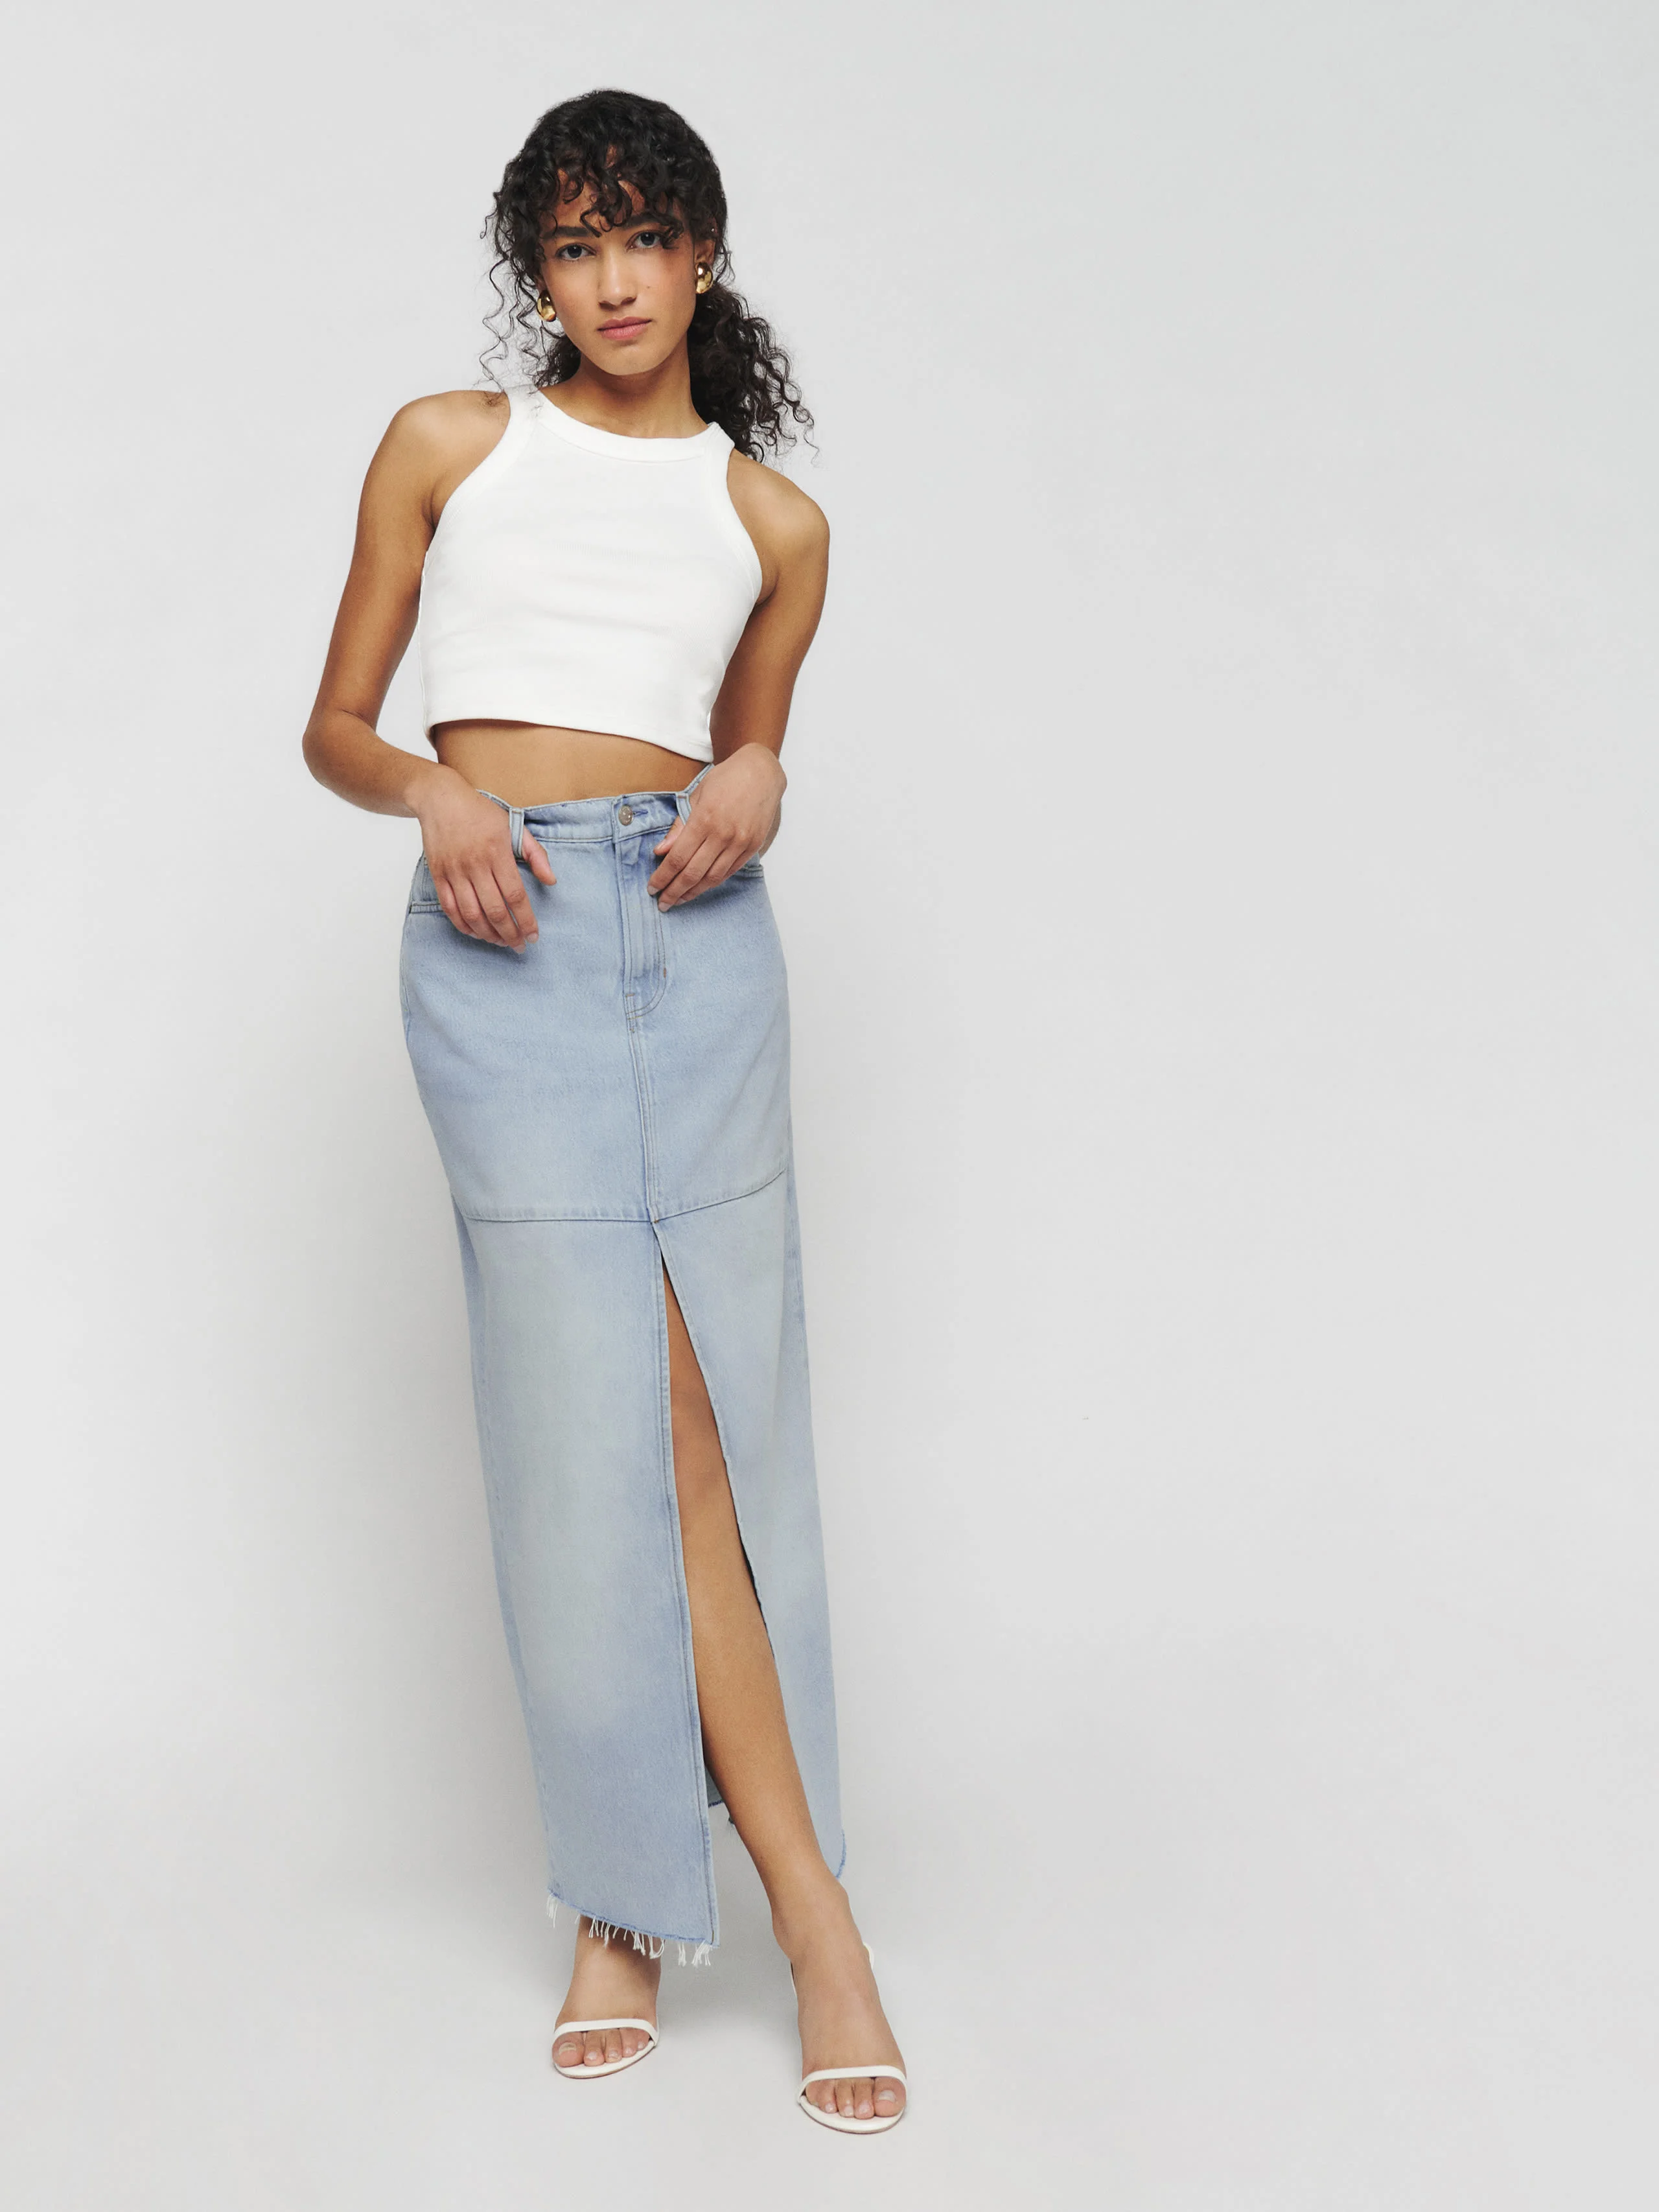 The Reformation Skirt That'll Make You Embrace the Denim Maxi